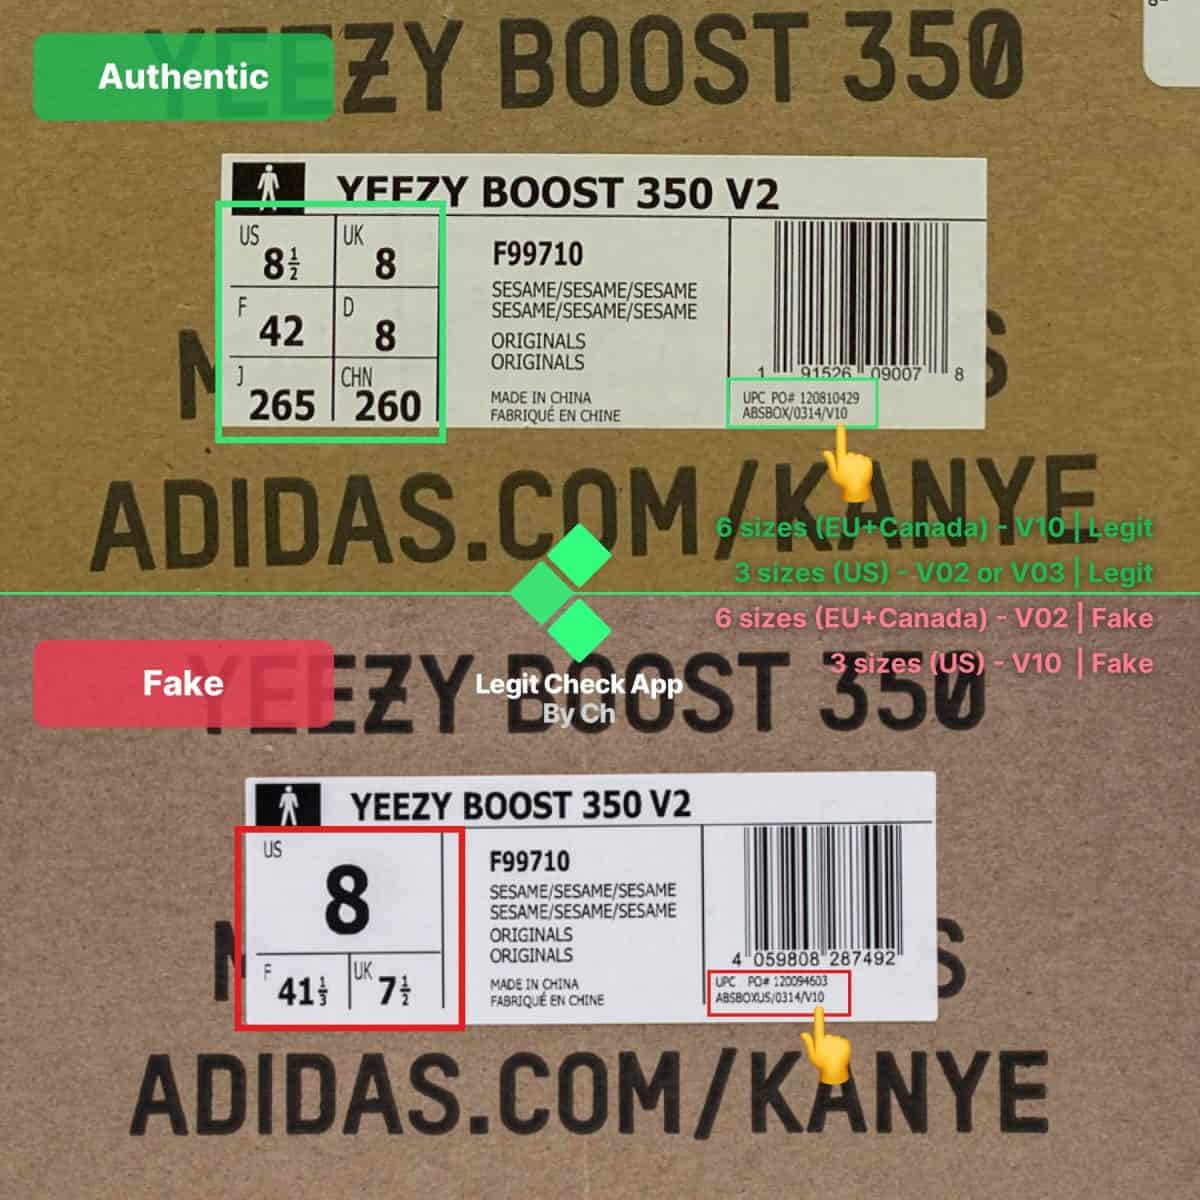 How To Spot Fake Vs Real Yeezy Sesame 